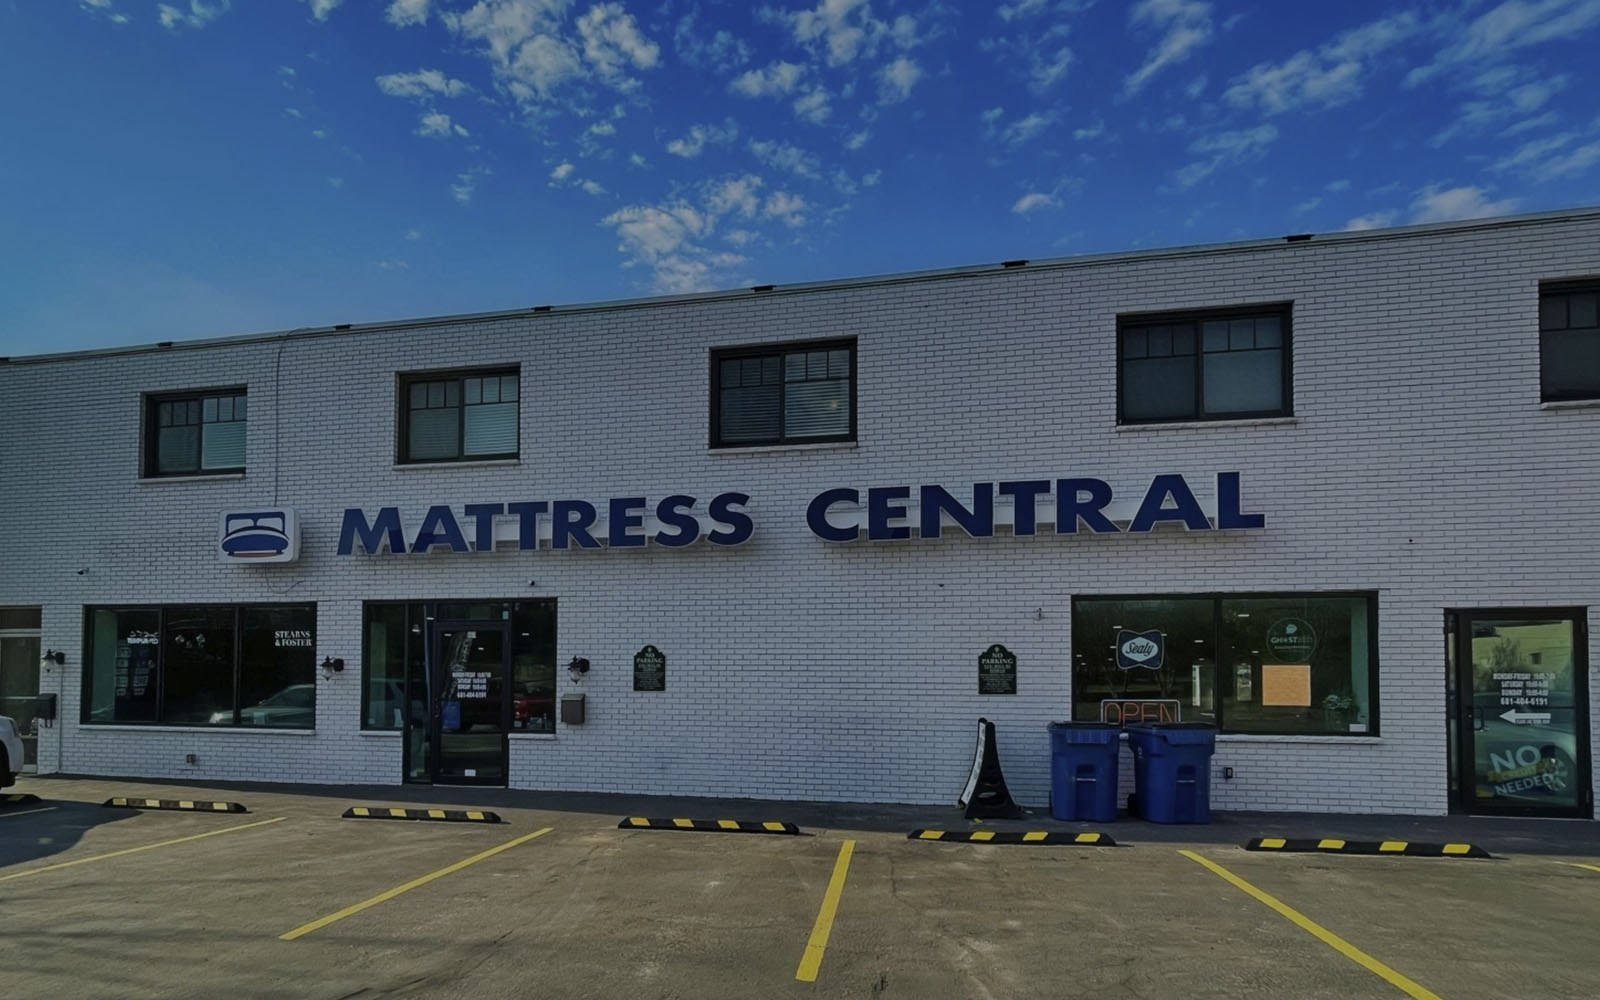 Mattress Central Fairmont West Virginia is an Authorized Harvest Green Mattress Experience Center Partner.  Visit today and try before you buy